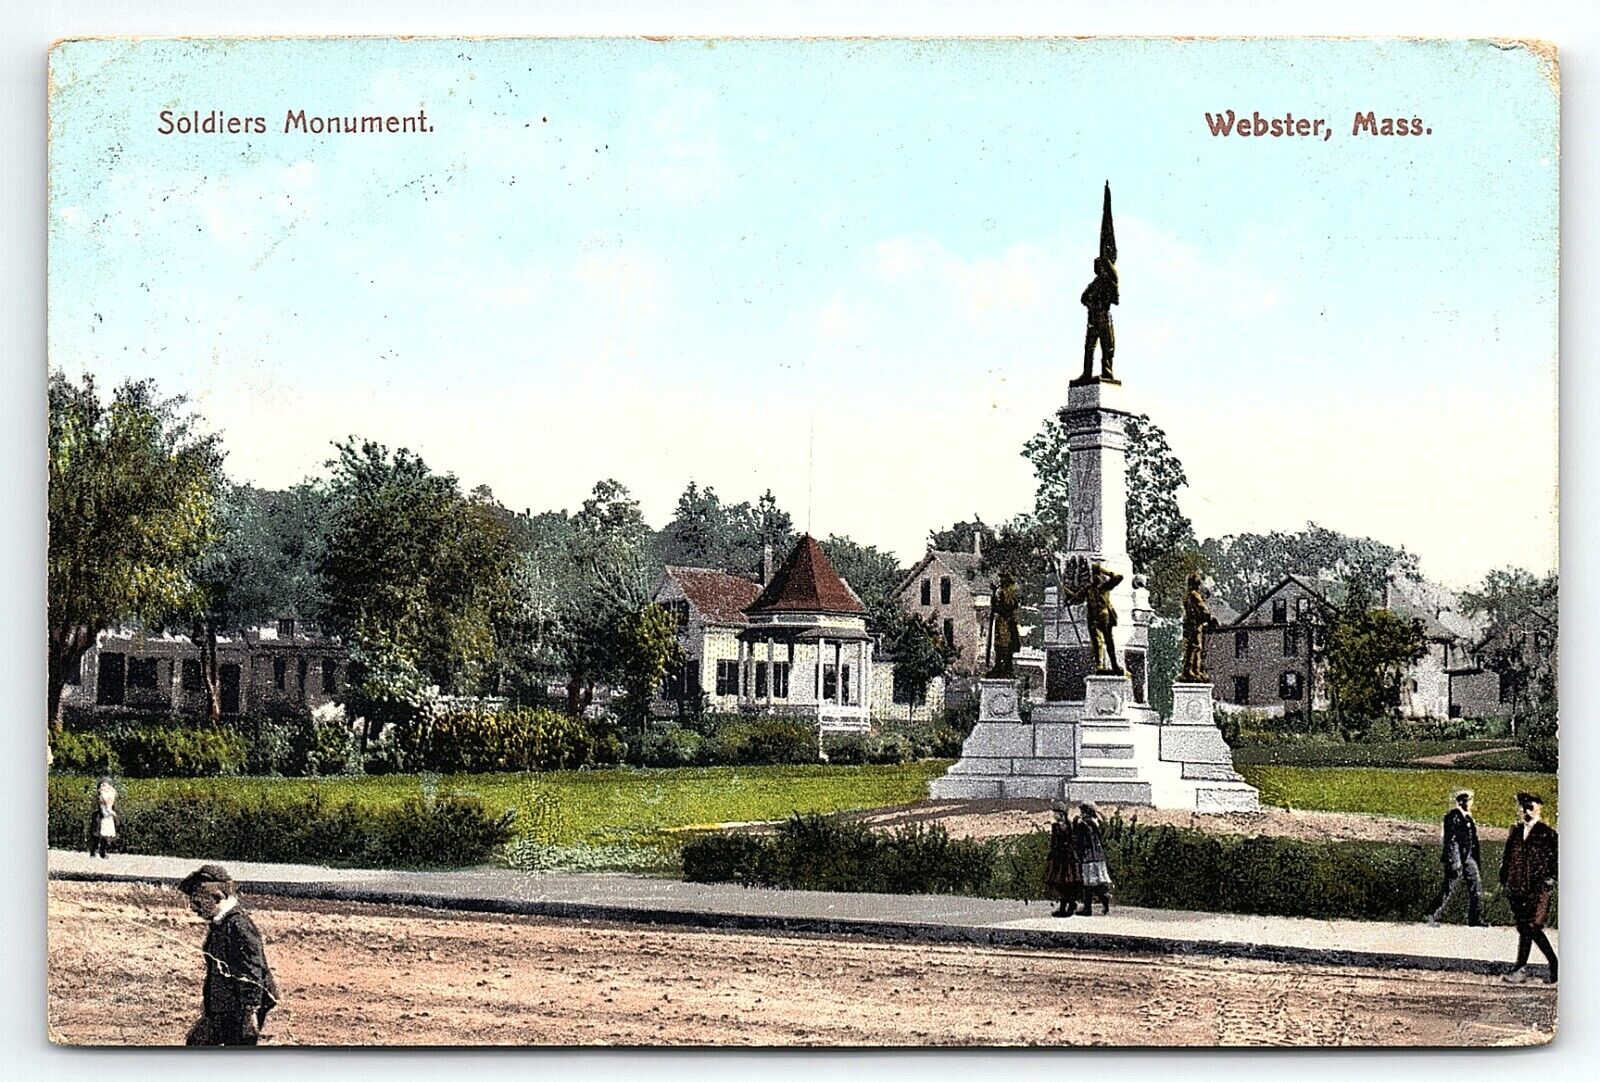 1909 WEBSTER MASSACHUSETTS SOLDIERS MONUMENT POLY-CHROME POSTCARD P3594